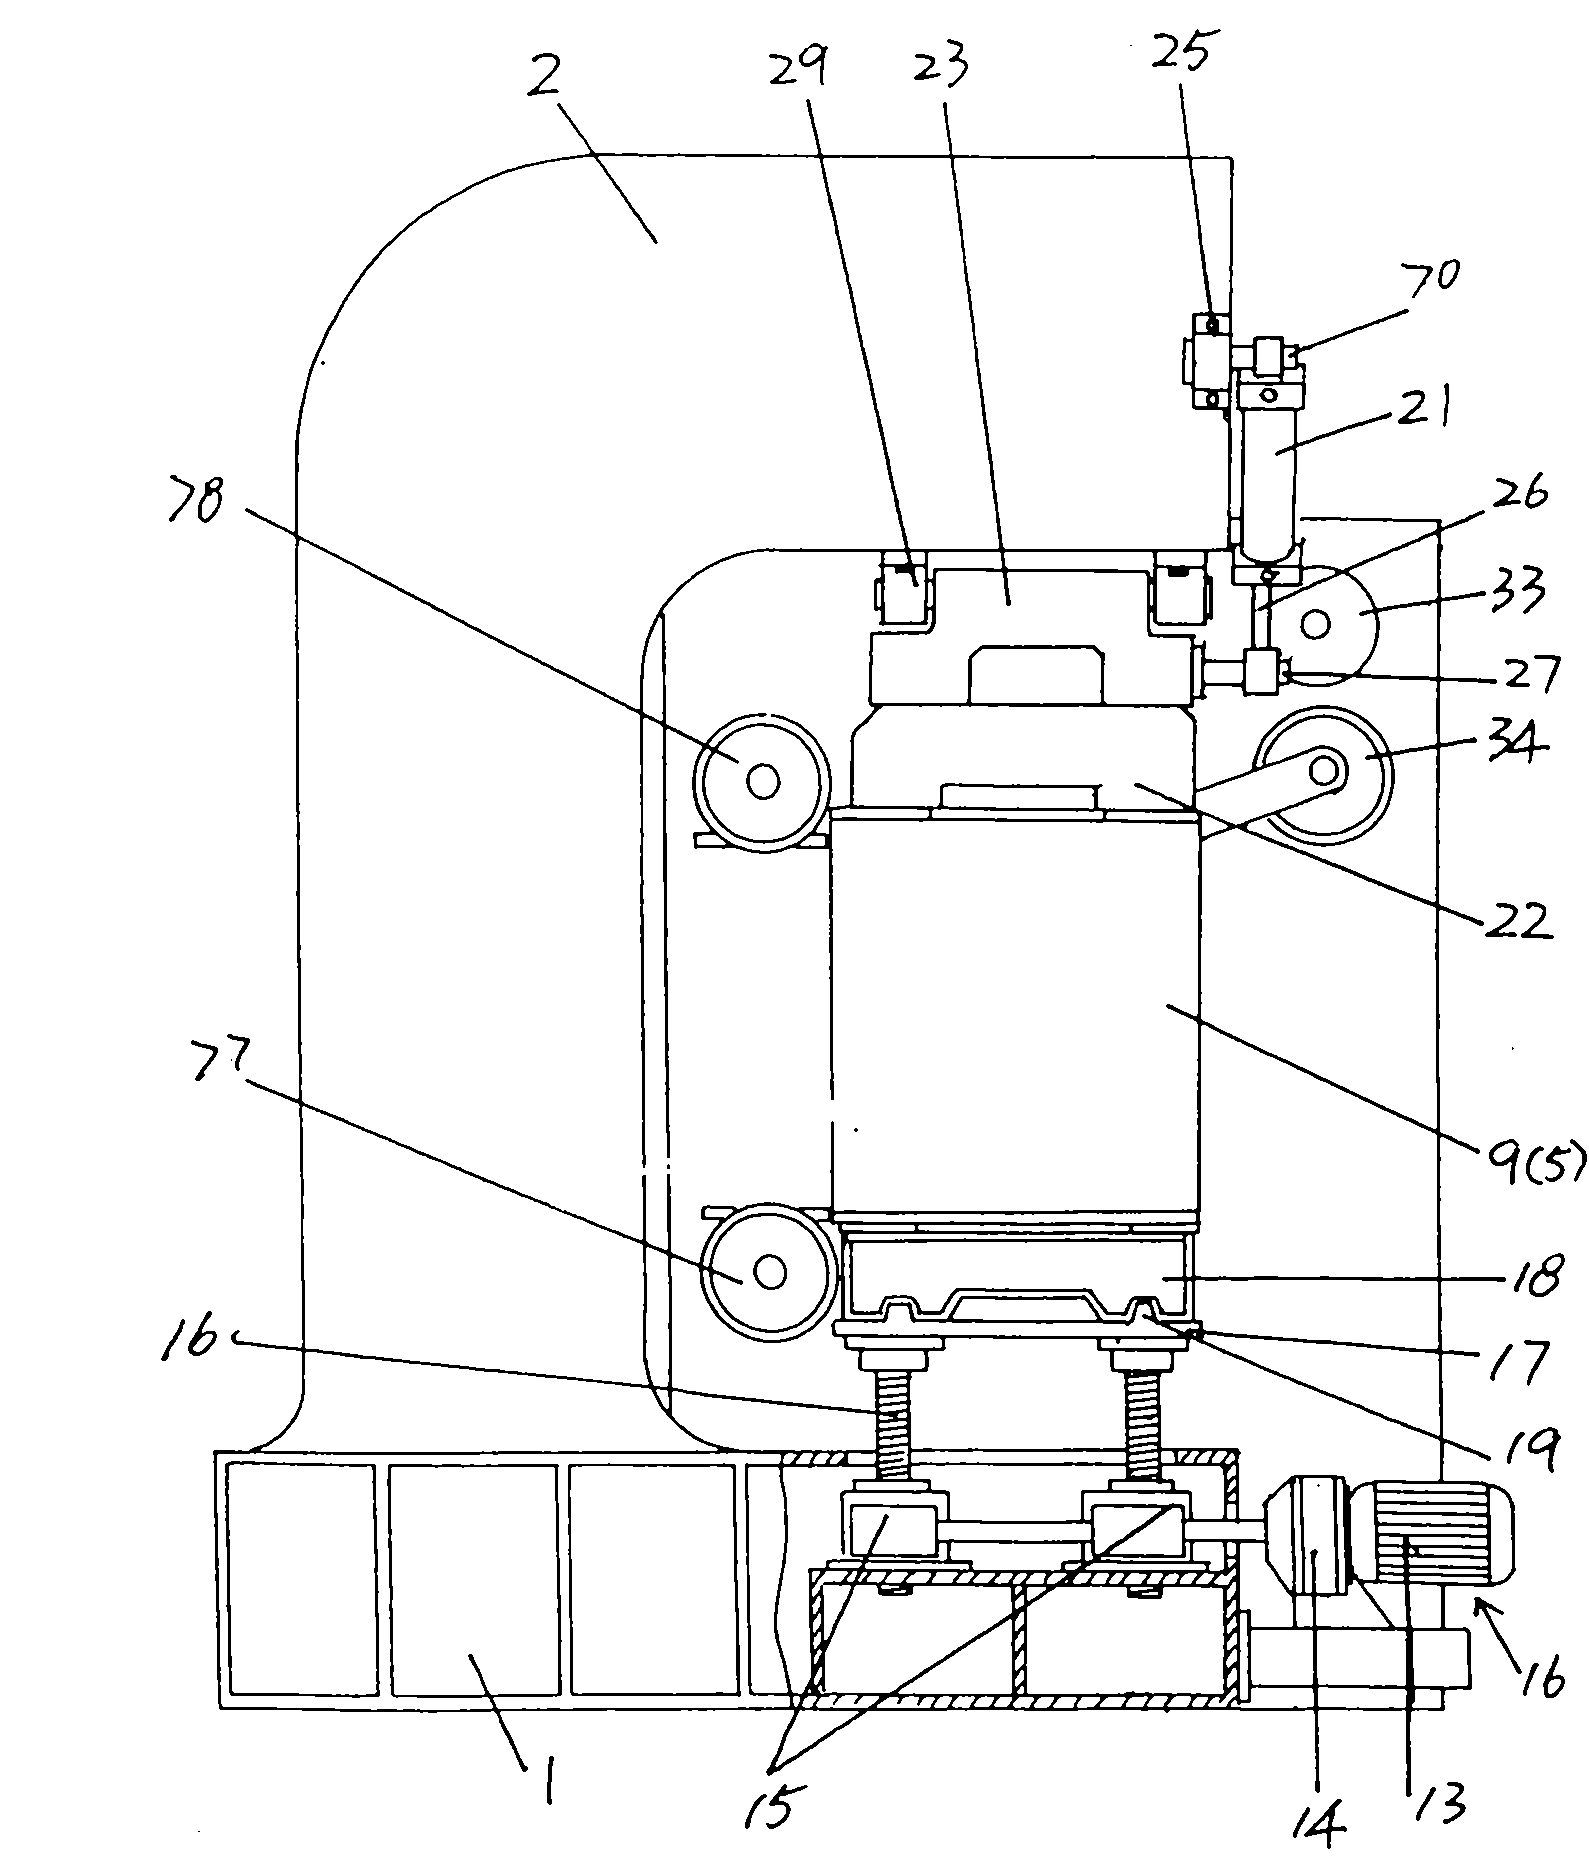 Formed felt collecting device of paper maker felt needling machine without end points